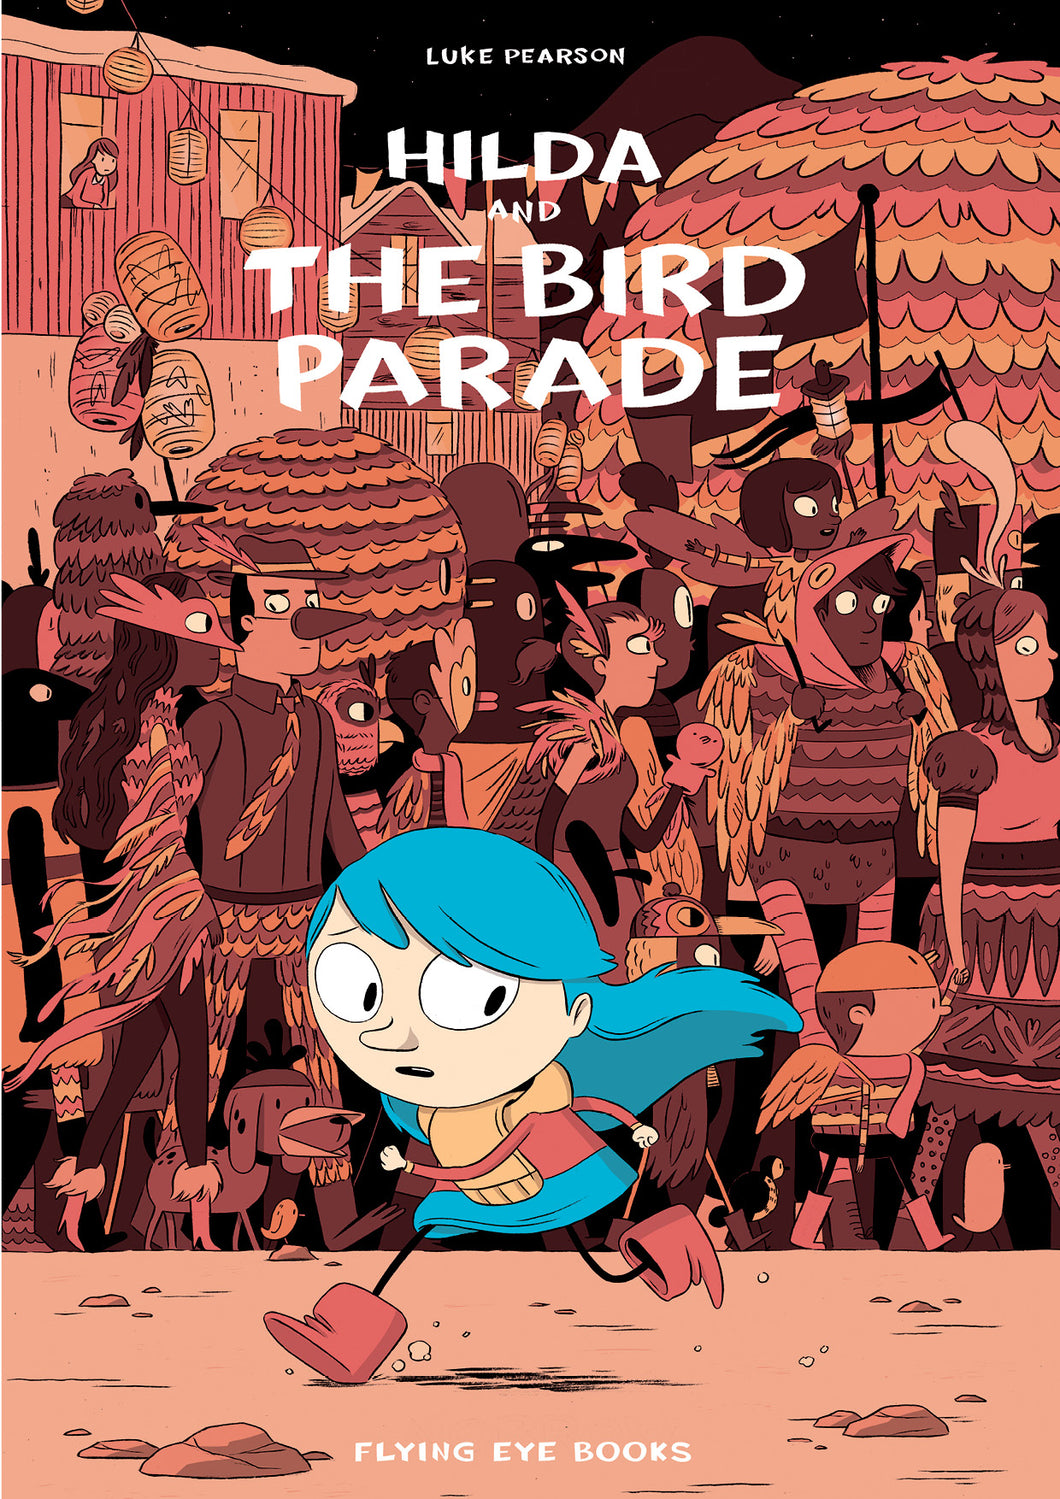 Hilda and the Bird Parade by Luke Pearson